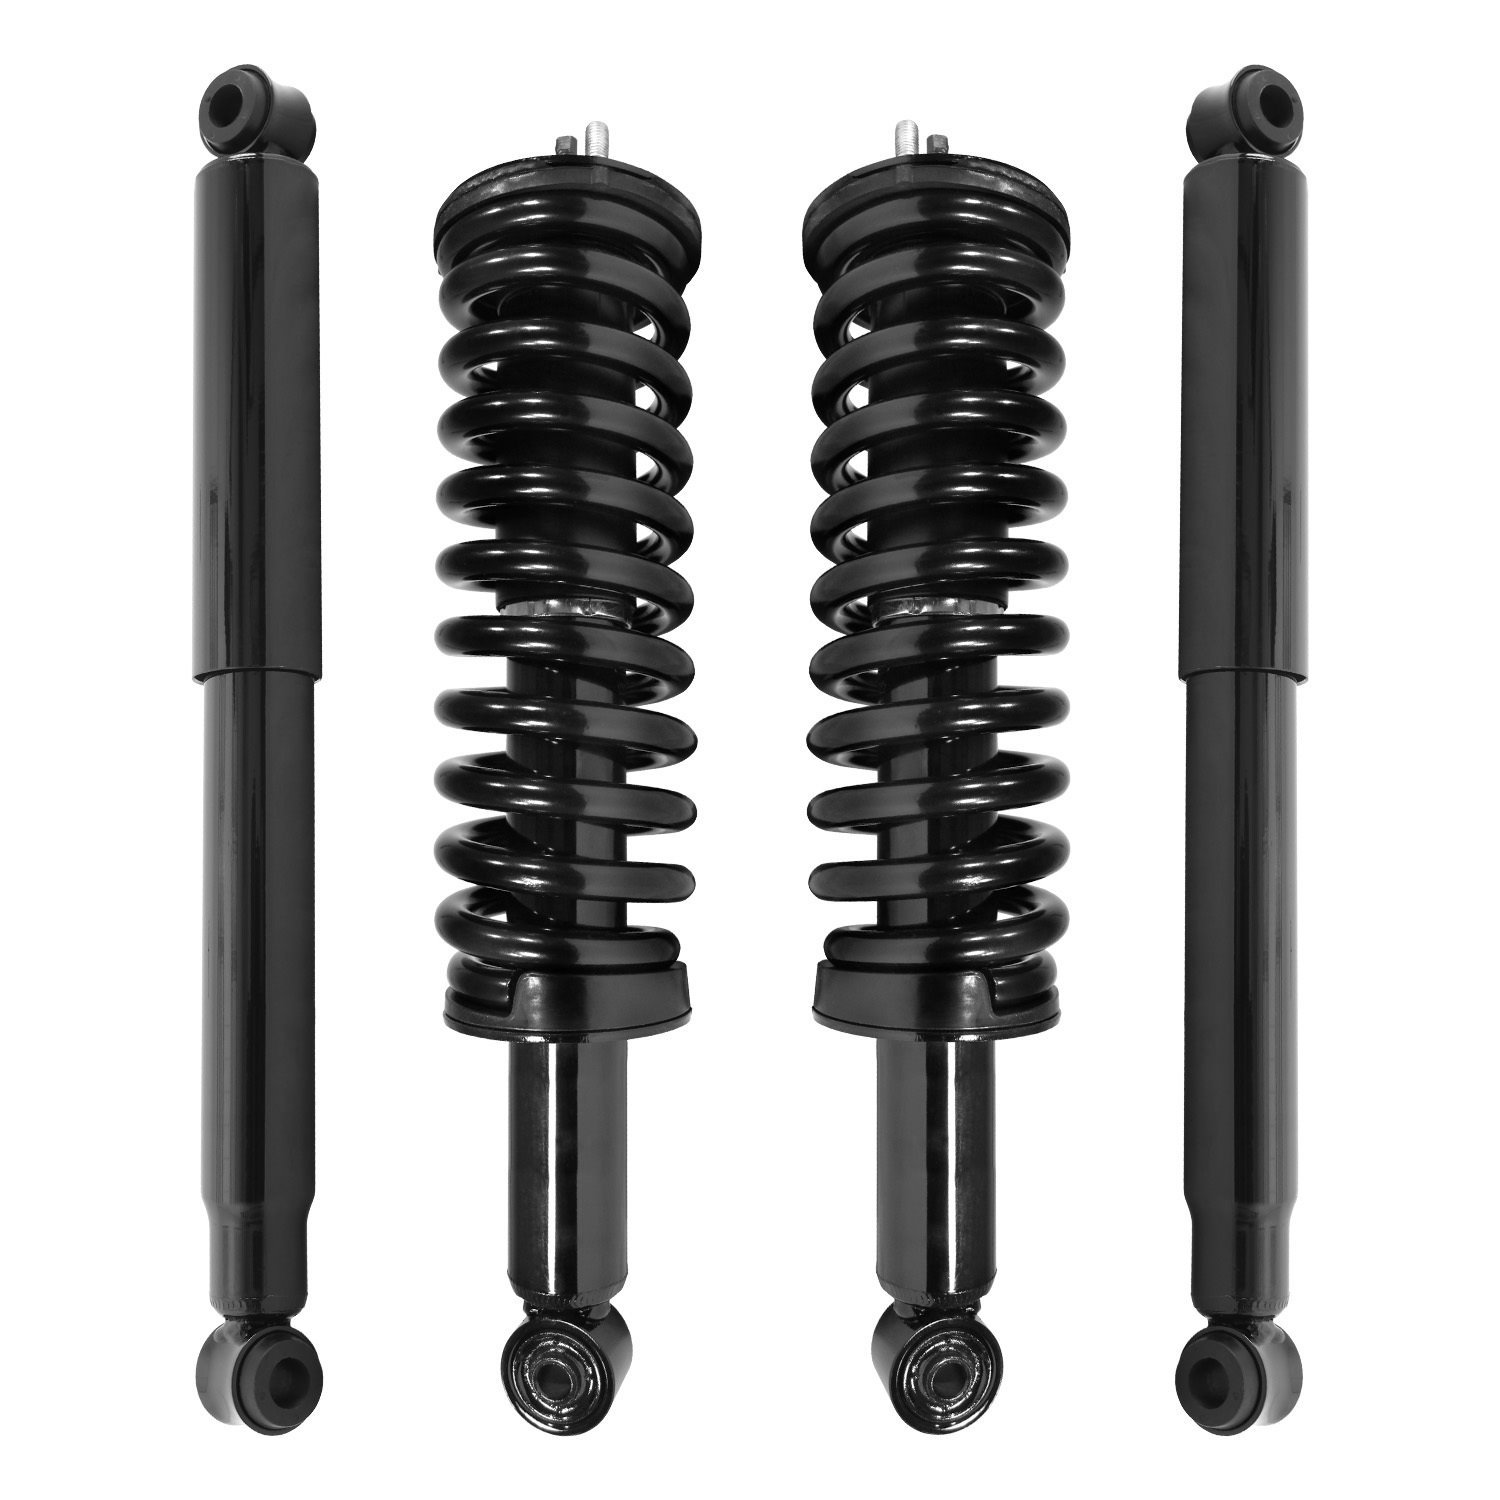 4-11081-254051-001 Front & Rear Suspension Strut & Coil Spring Assembly Fits Select Toyota Tacoma